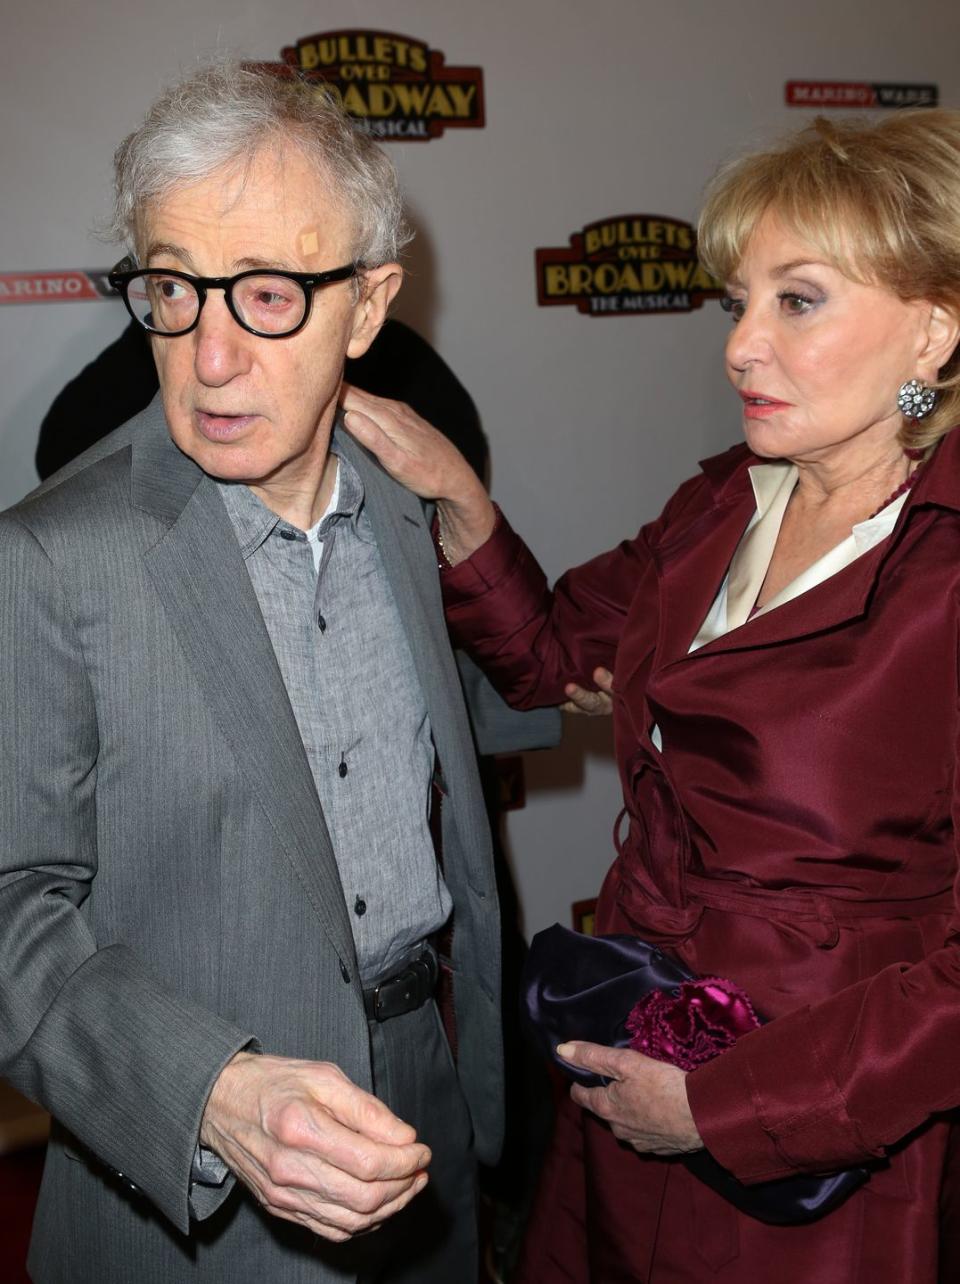 When Barbara Walters defended Woody Allen amid abuse allegations.